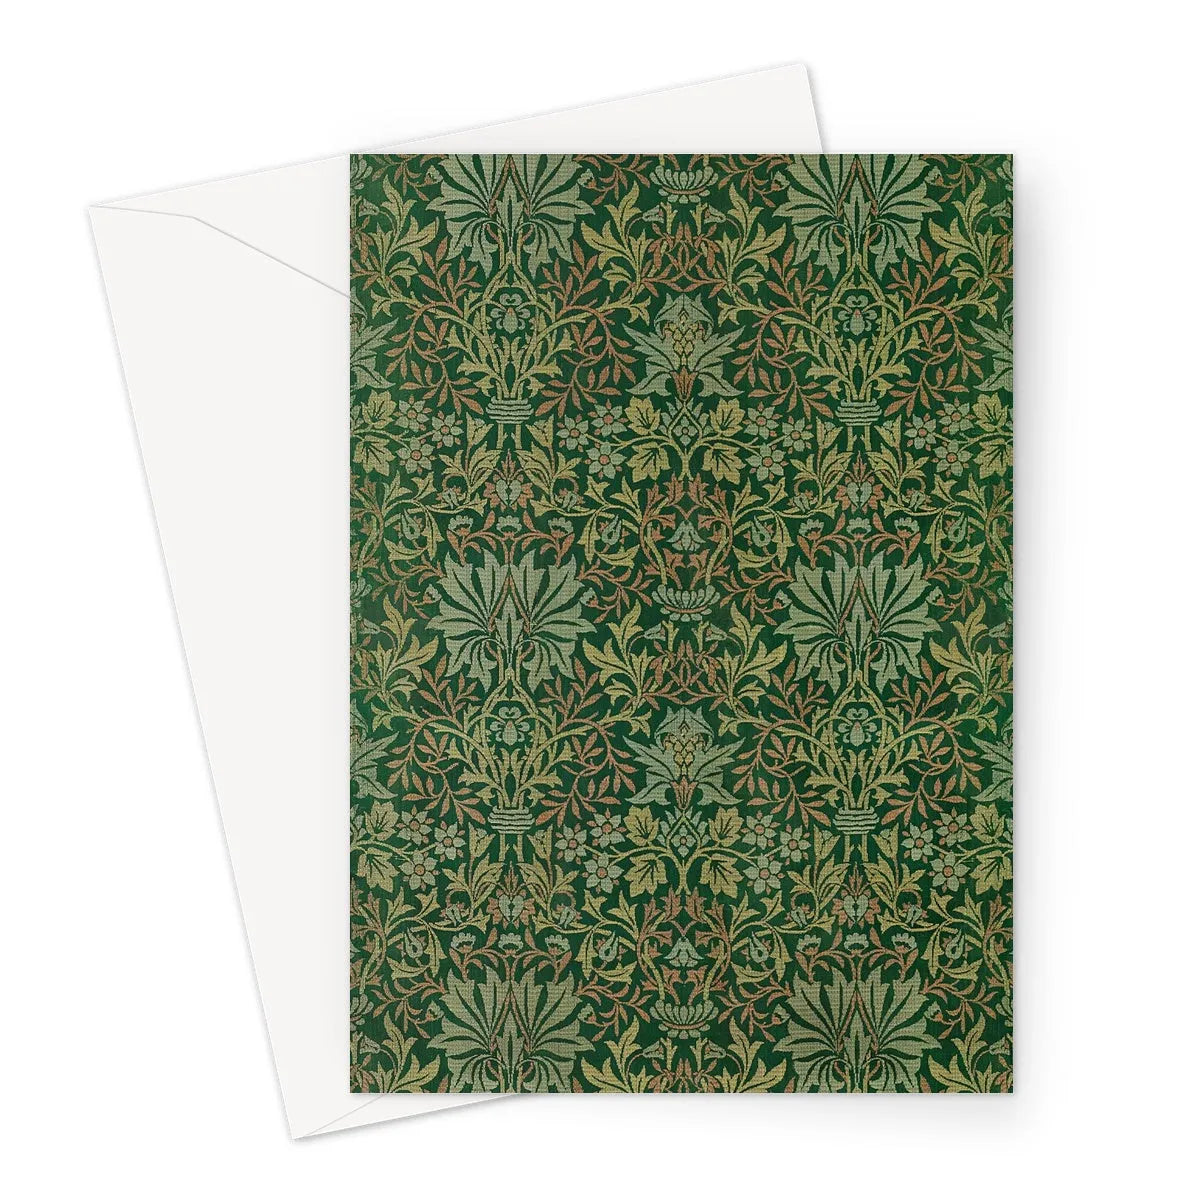 Flower Garden By William Morris Greeting Card - A5 Portrait / 1 Card - Greeting & Note Cards - Aesthetic Art